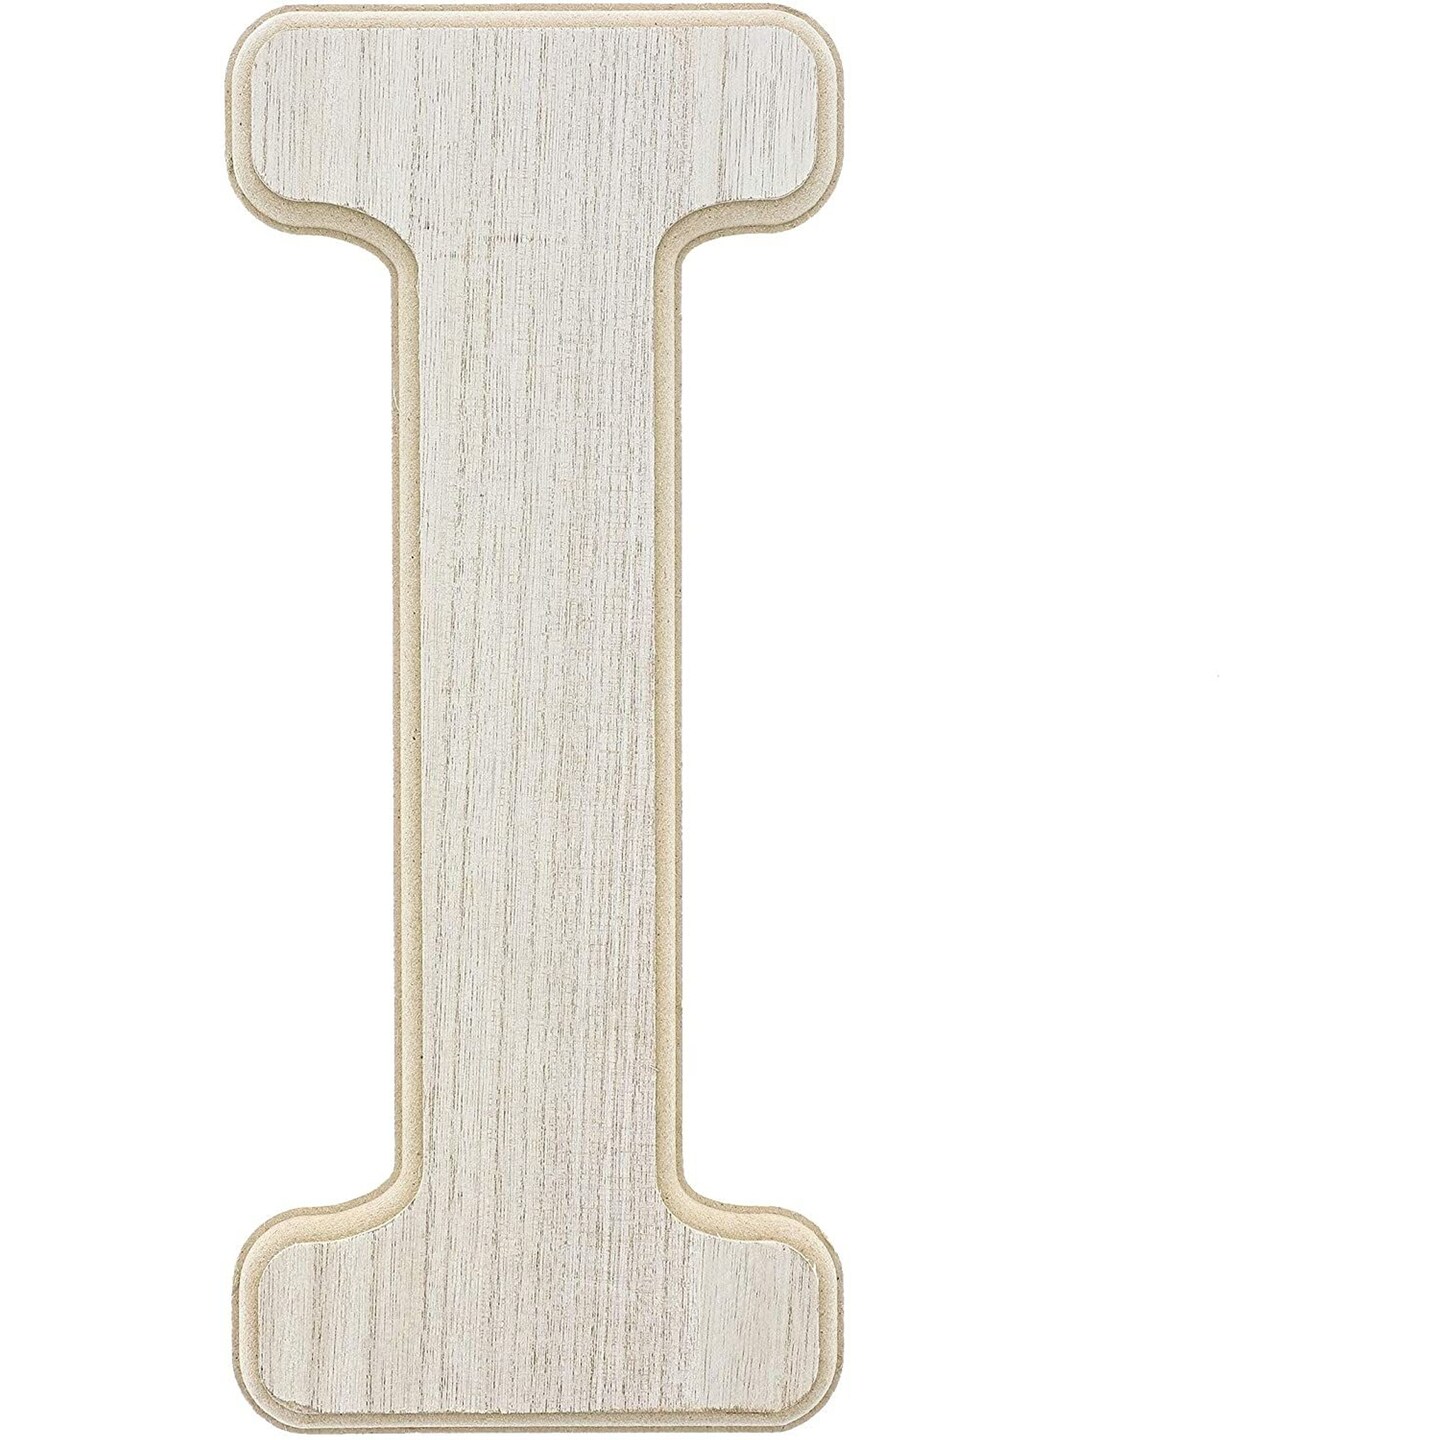 Wood Wall Decor, Wooden Letter I (12 in)